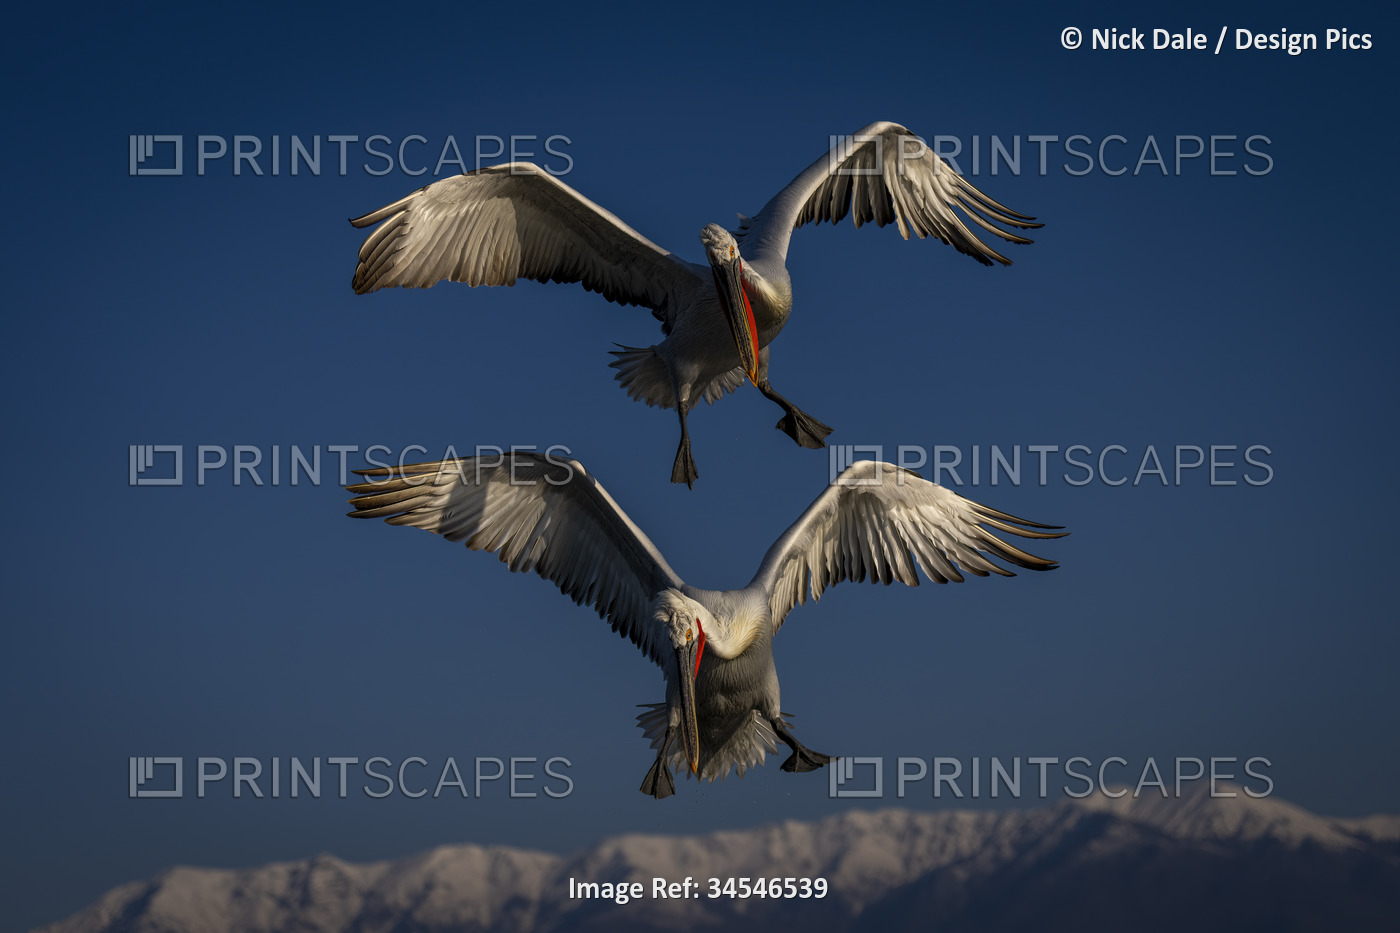 Two Dalmatian pelicans (Pelecanus crispus)  fly looking down by mountains; ...